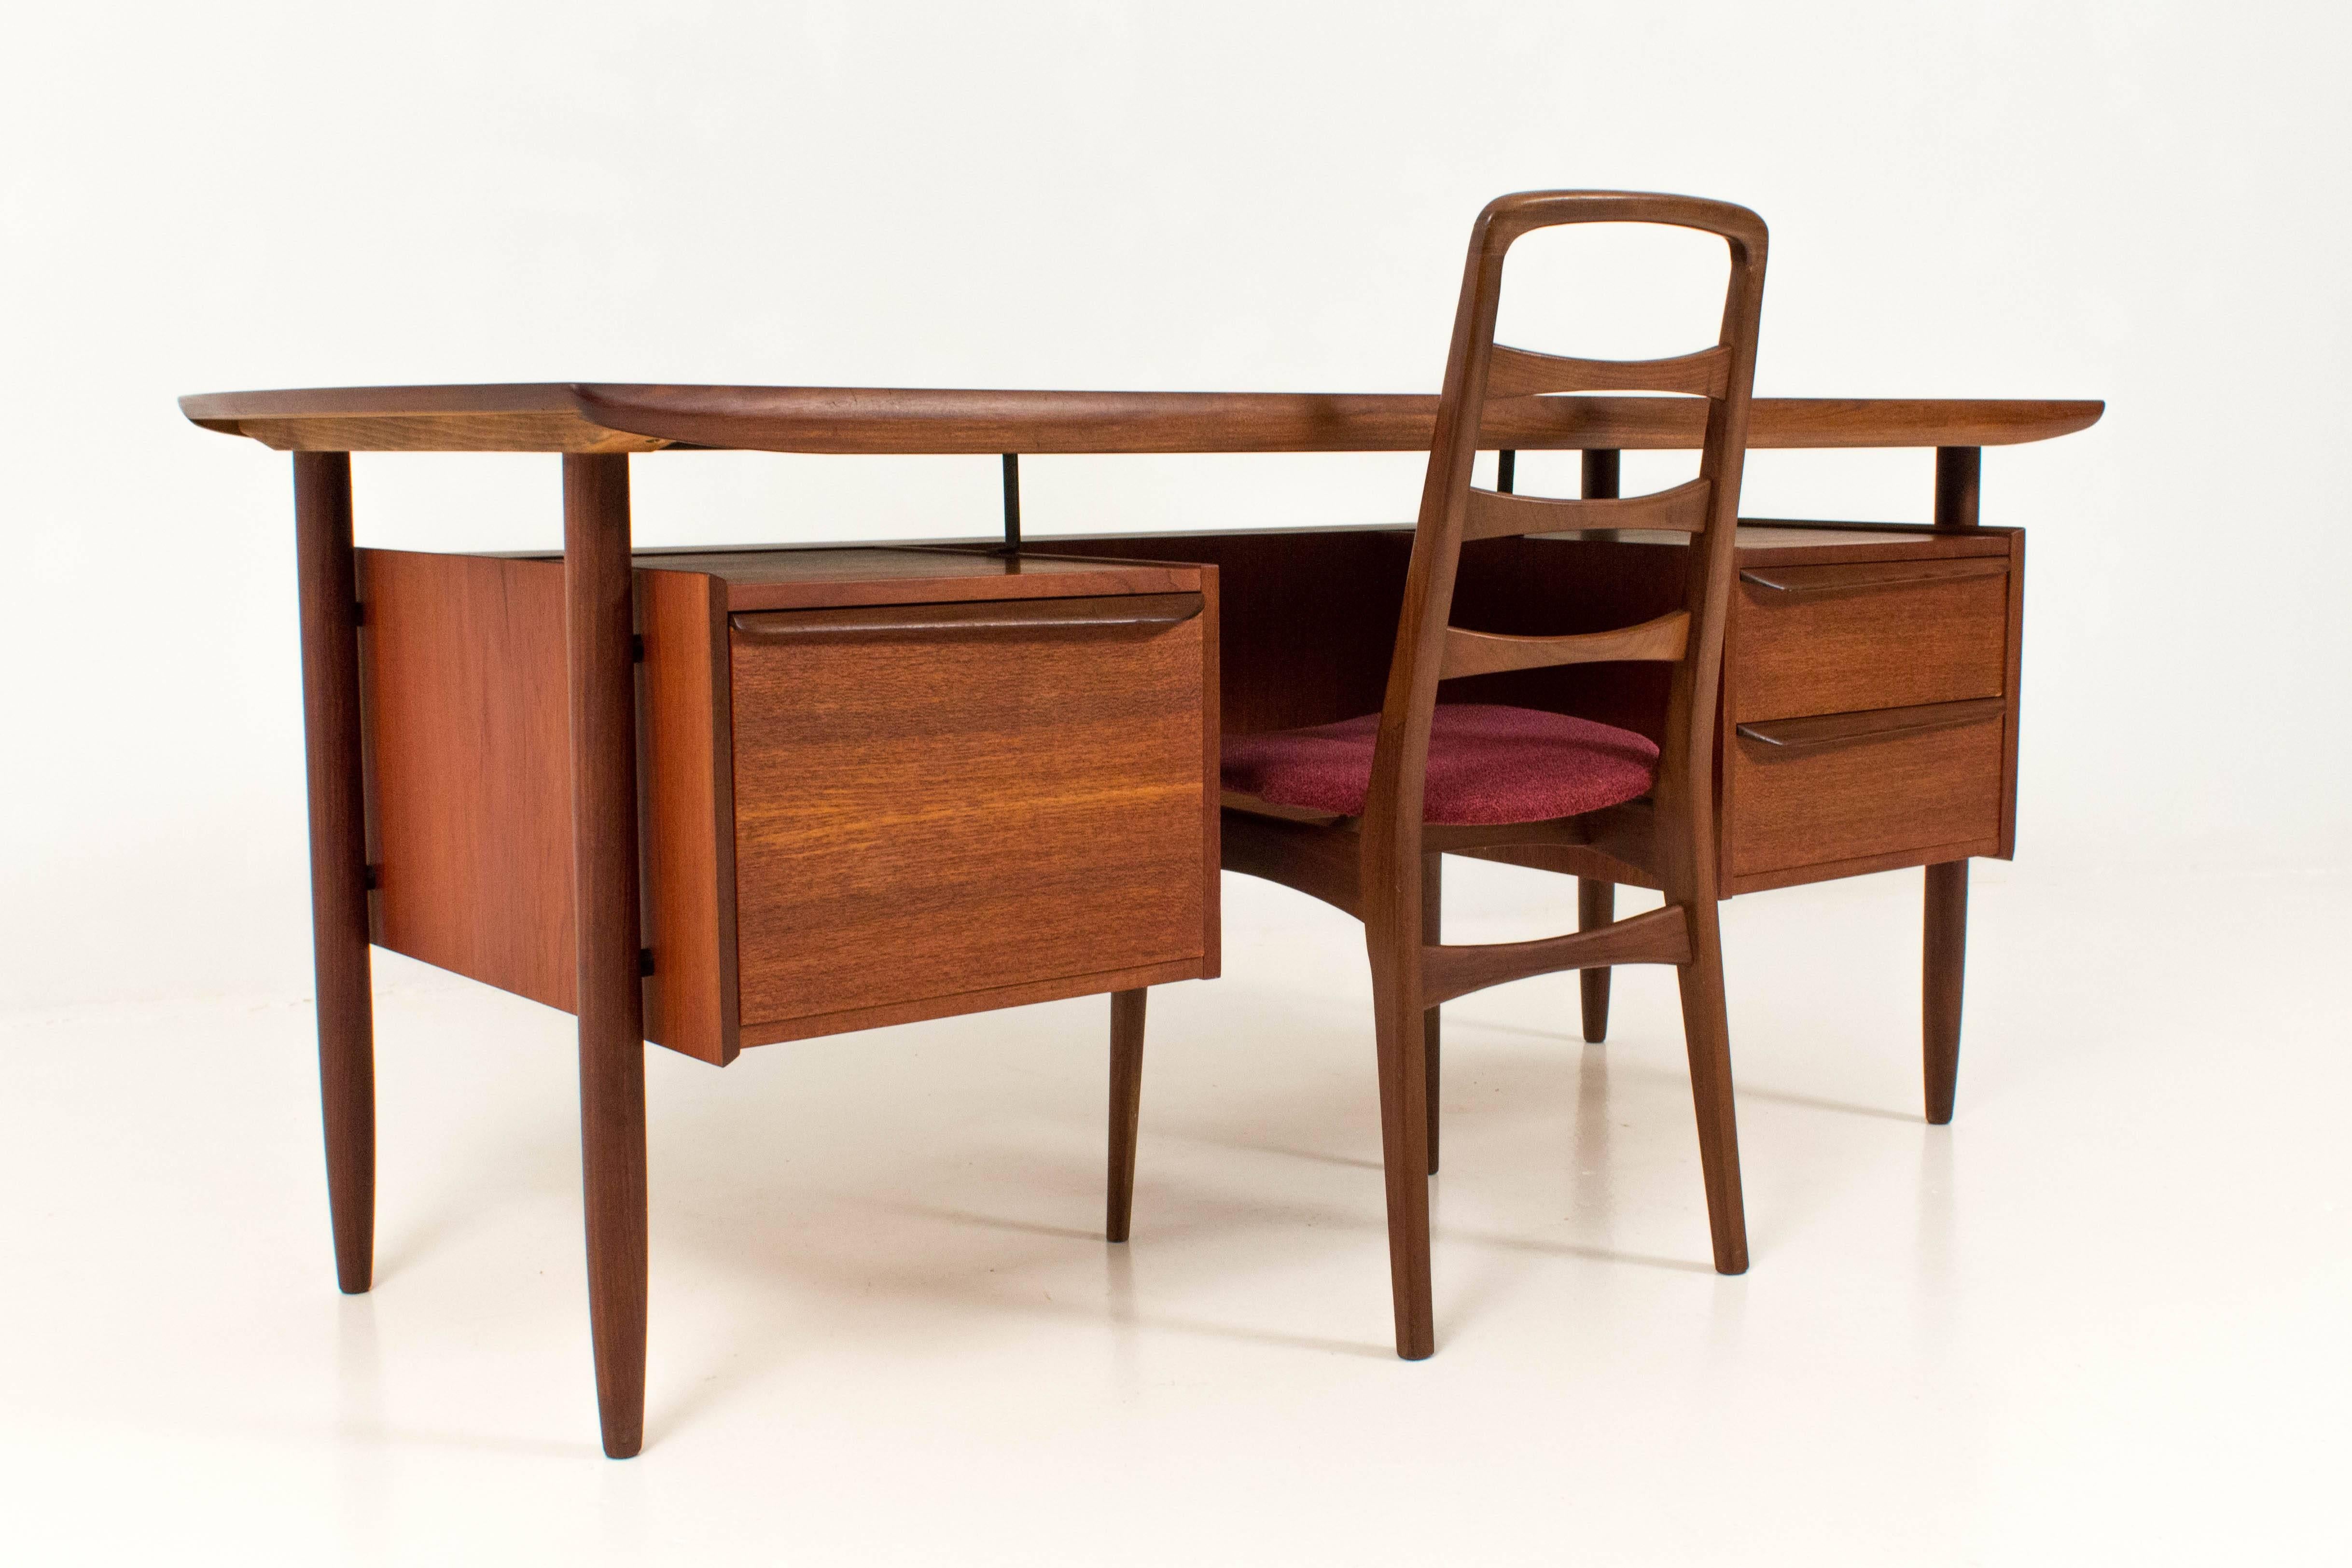 Mid-Century Modern teak floating top desk by Tijsseling for Hulmefa, 1960s.
Three drawers with organic pulls and rear bookshelf.
Together with a nicely shaped chair.
In good original condition with minor wear consistent with age and